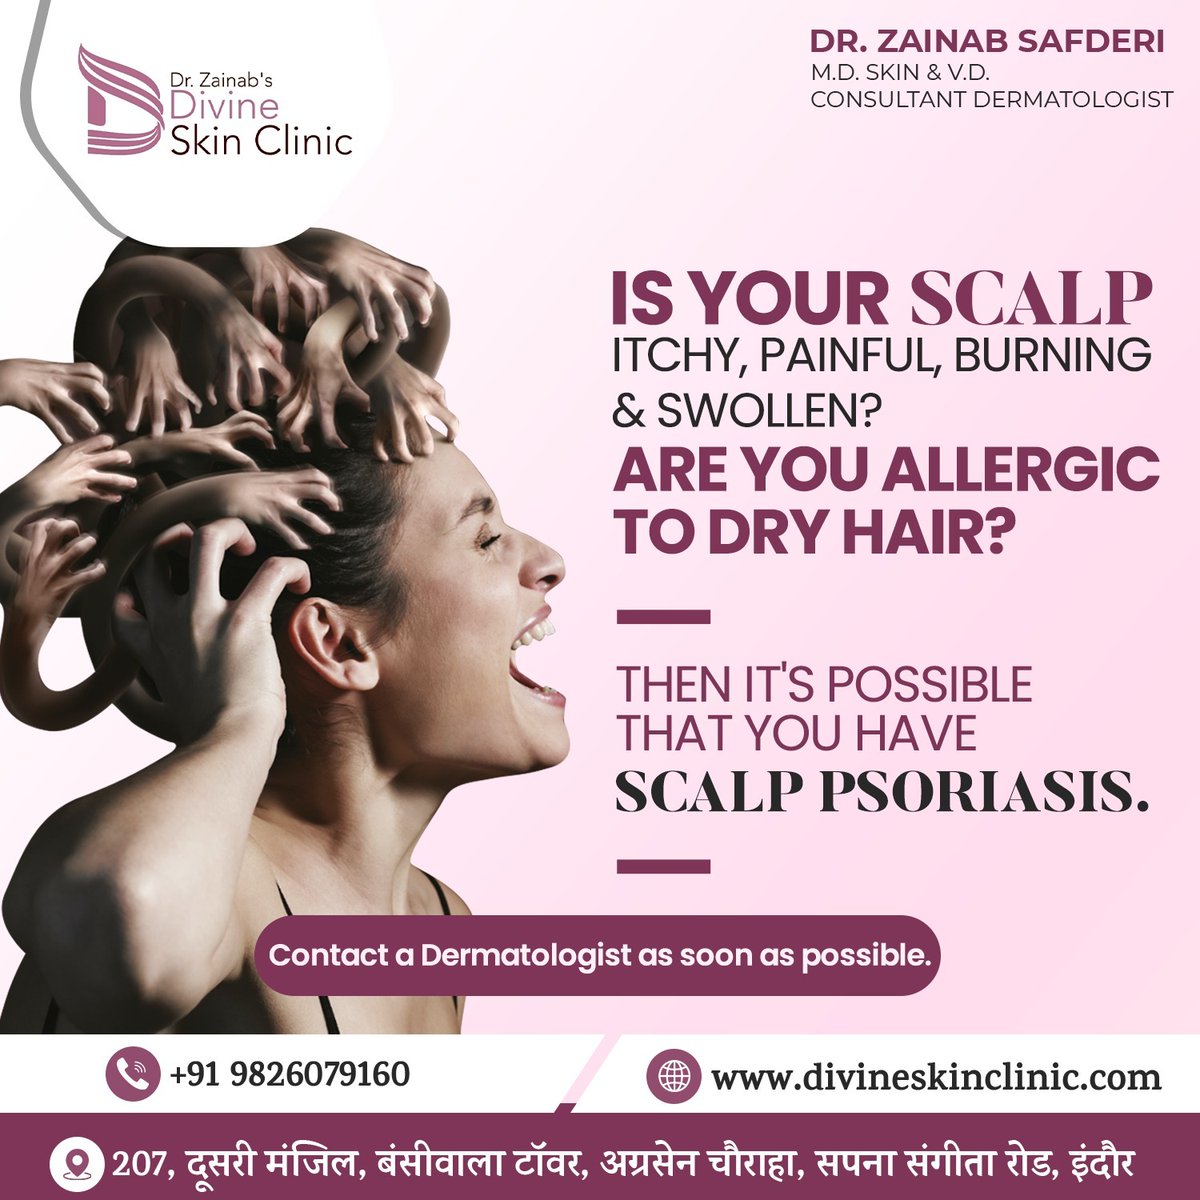 It’s important to pay attention to your skin, including your scalp. Consult Dr. Zainab Safderi at +91 9826079160 #scalppsoriasis #scalphealth #psoriasistreatment #healthyhairhealthylife #skincareroutine #psoriasiswarrior #dermatologist #DrZainabSafderi #divineskinclinic #indore